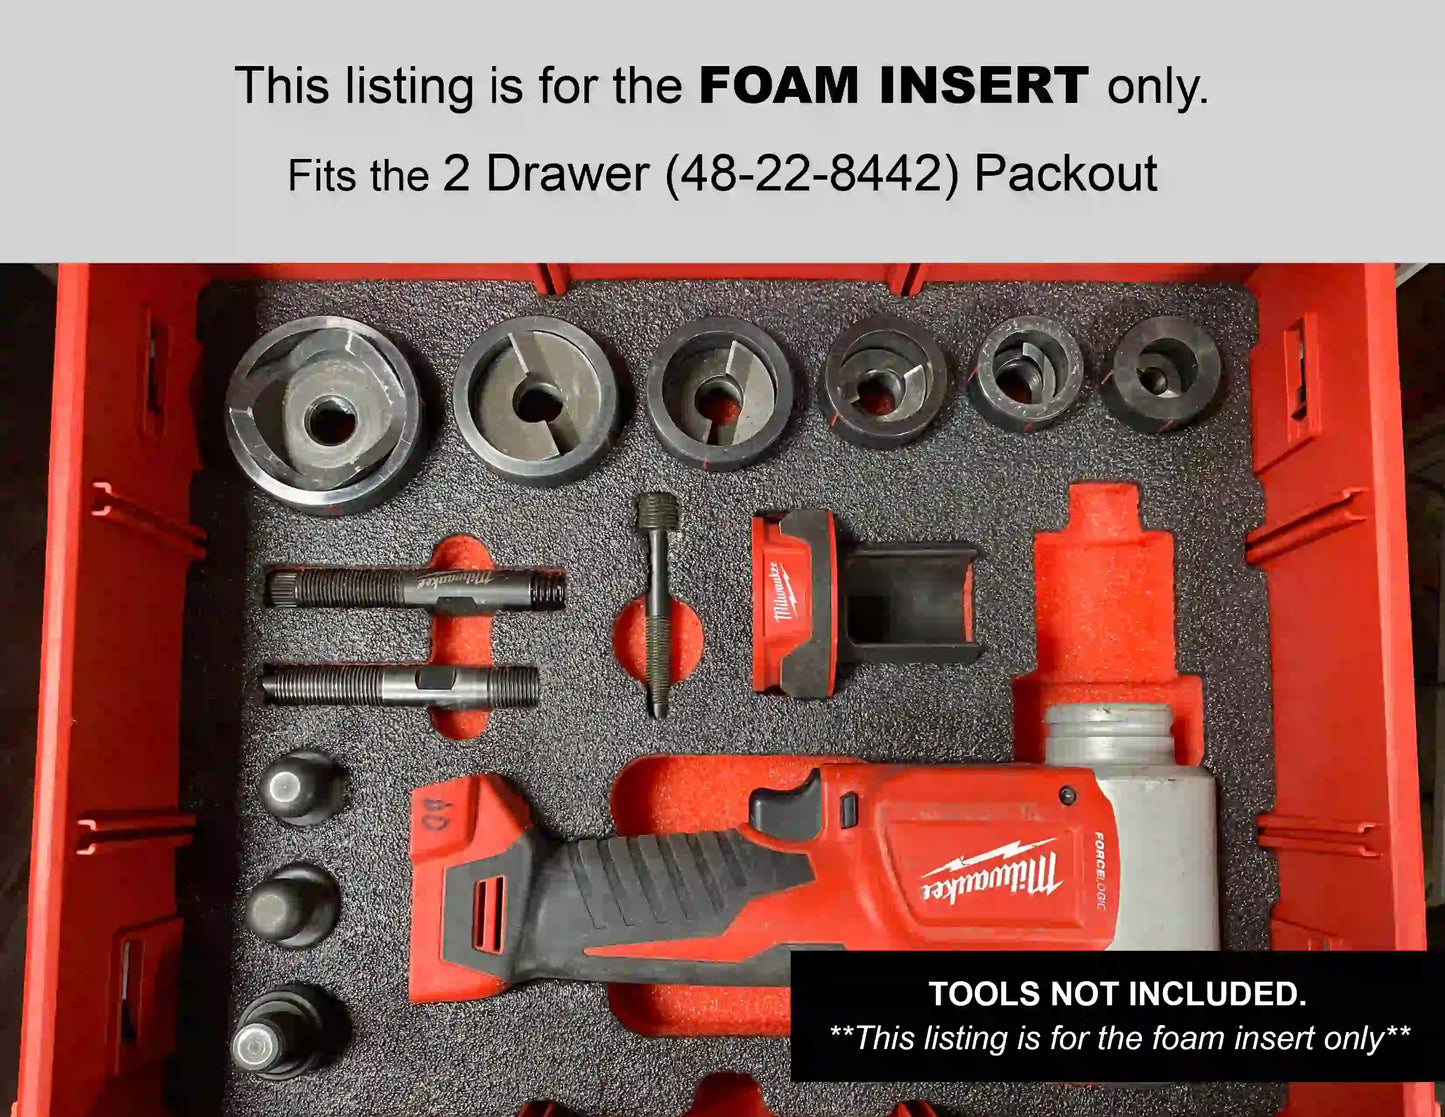 FOAM INSERT to store M18 Force Logic 10 Ton Knockout Kit 2676-22 in a Milwaukee Packout 2 Drawer Tool Box- Tools NOT Included